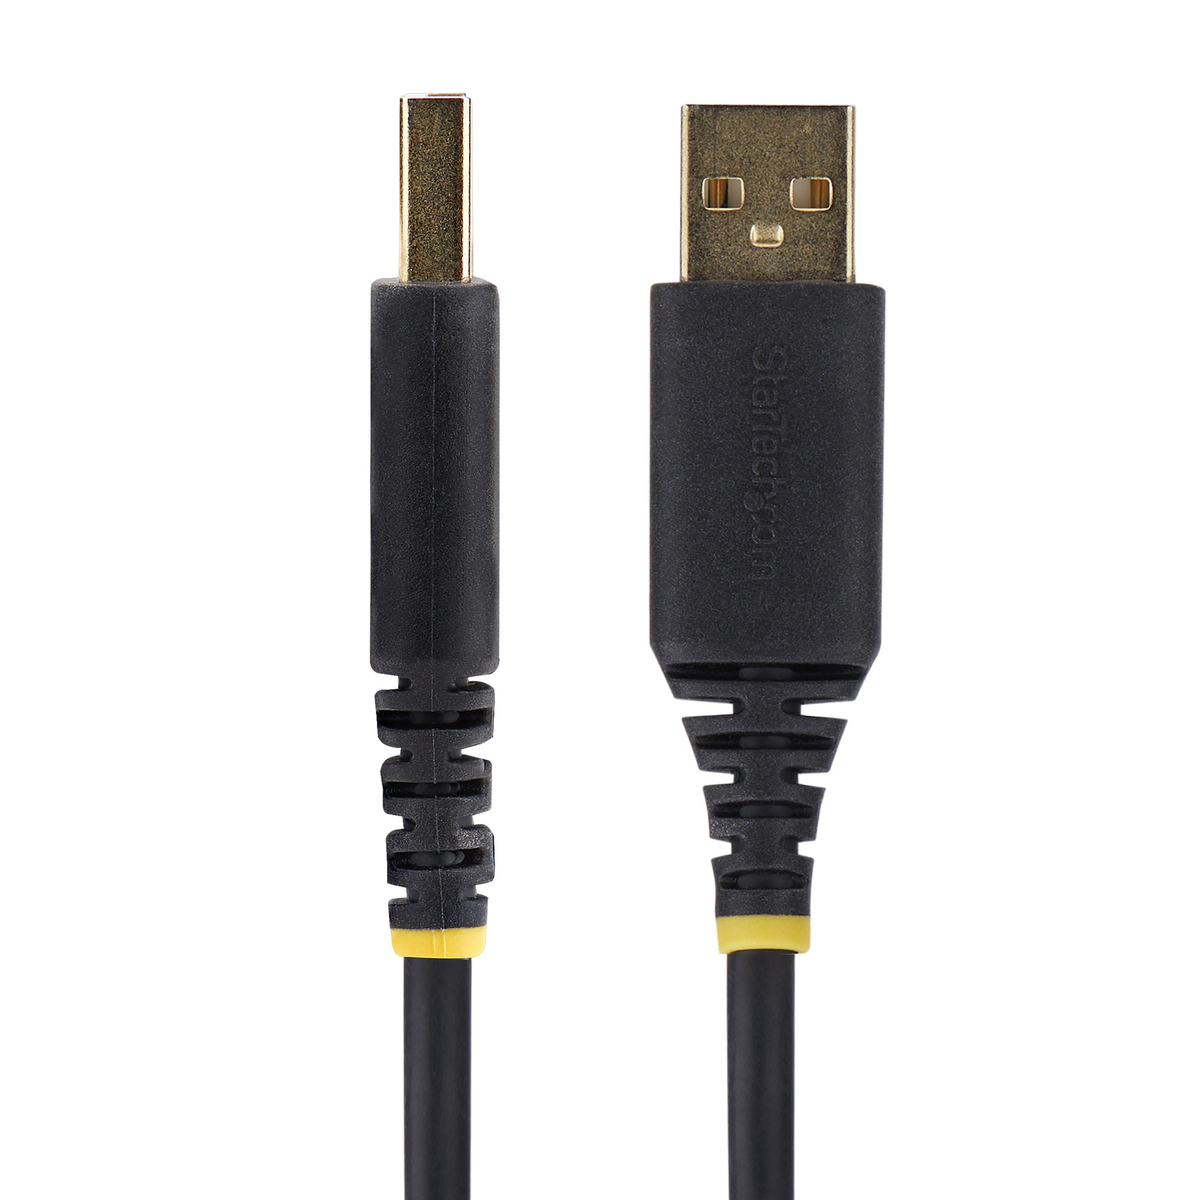 10ft/3m USB to Null Modem Serial Cable